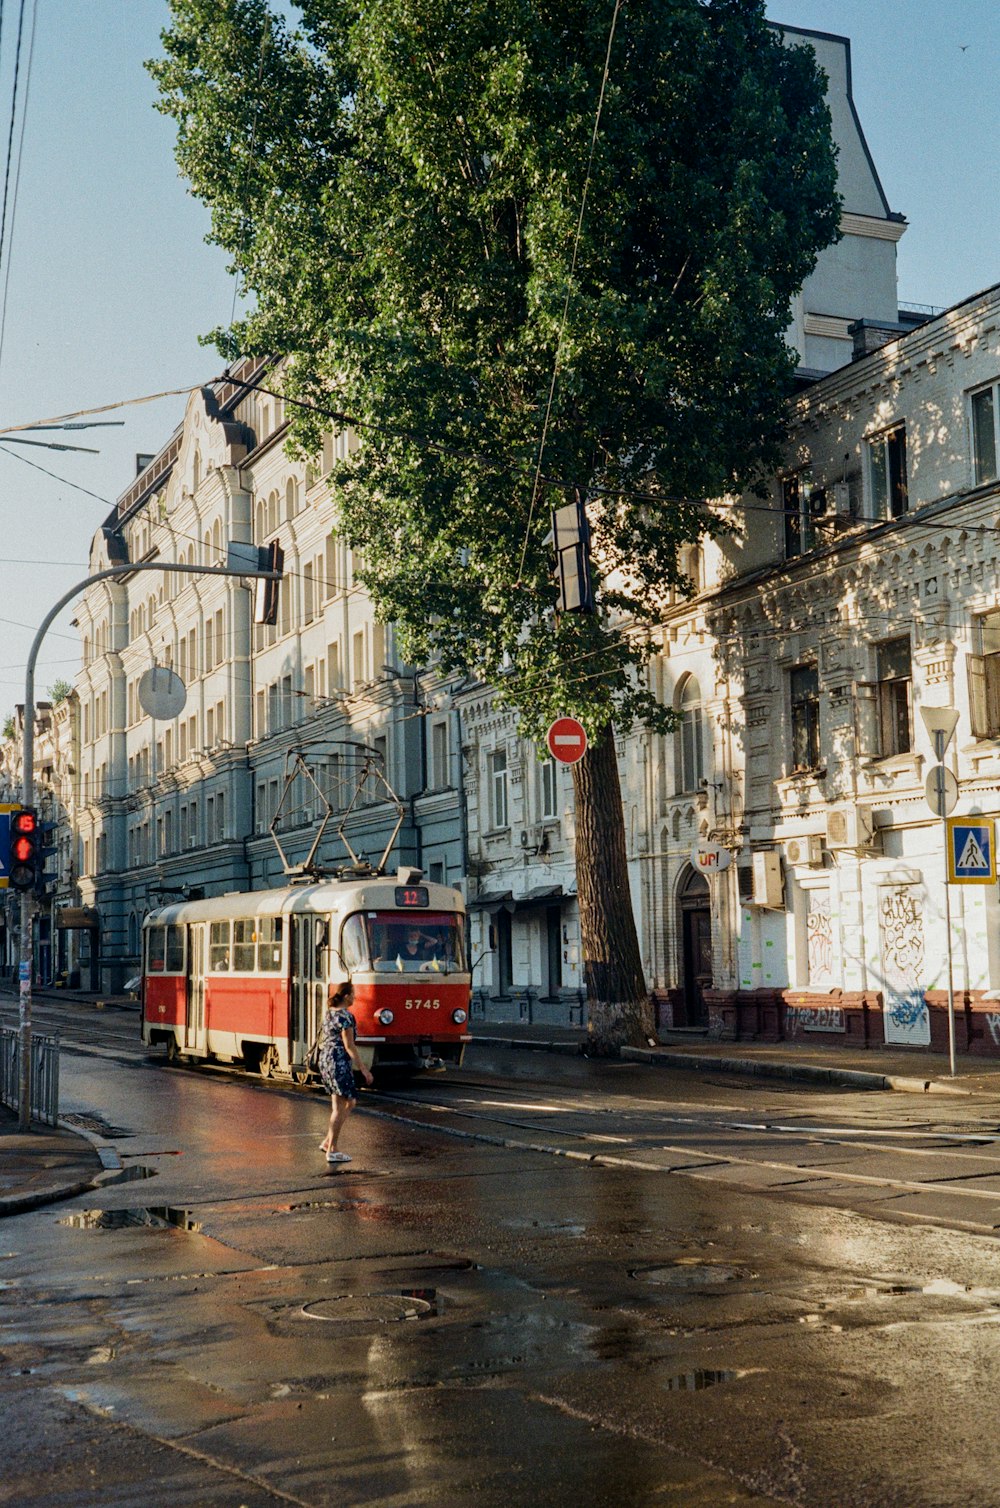 red tram on road near buildings during daytime